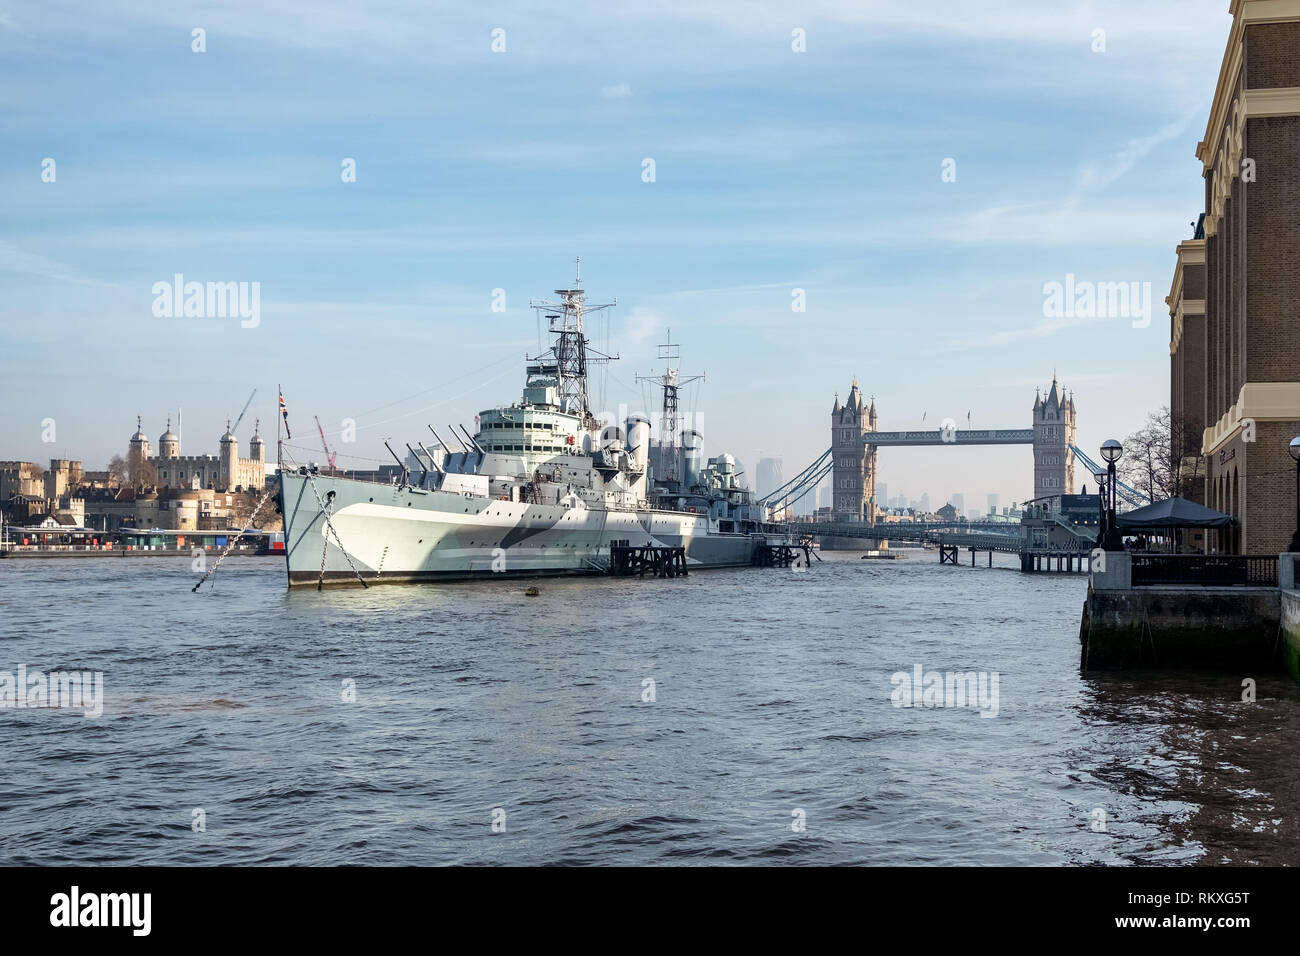 HMS Belfast is a Town-class light cruiser that was built for the Royal Navy.  She is moored on the River Thames, London, England as a museum ship. Stock Photo